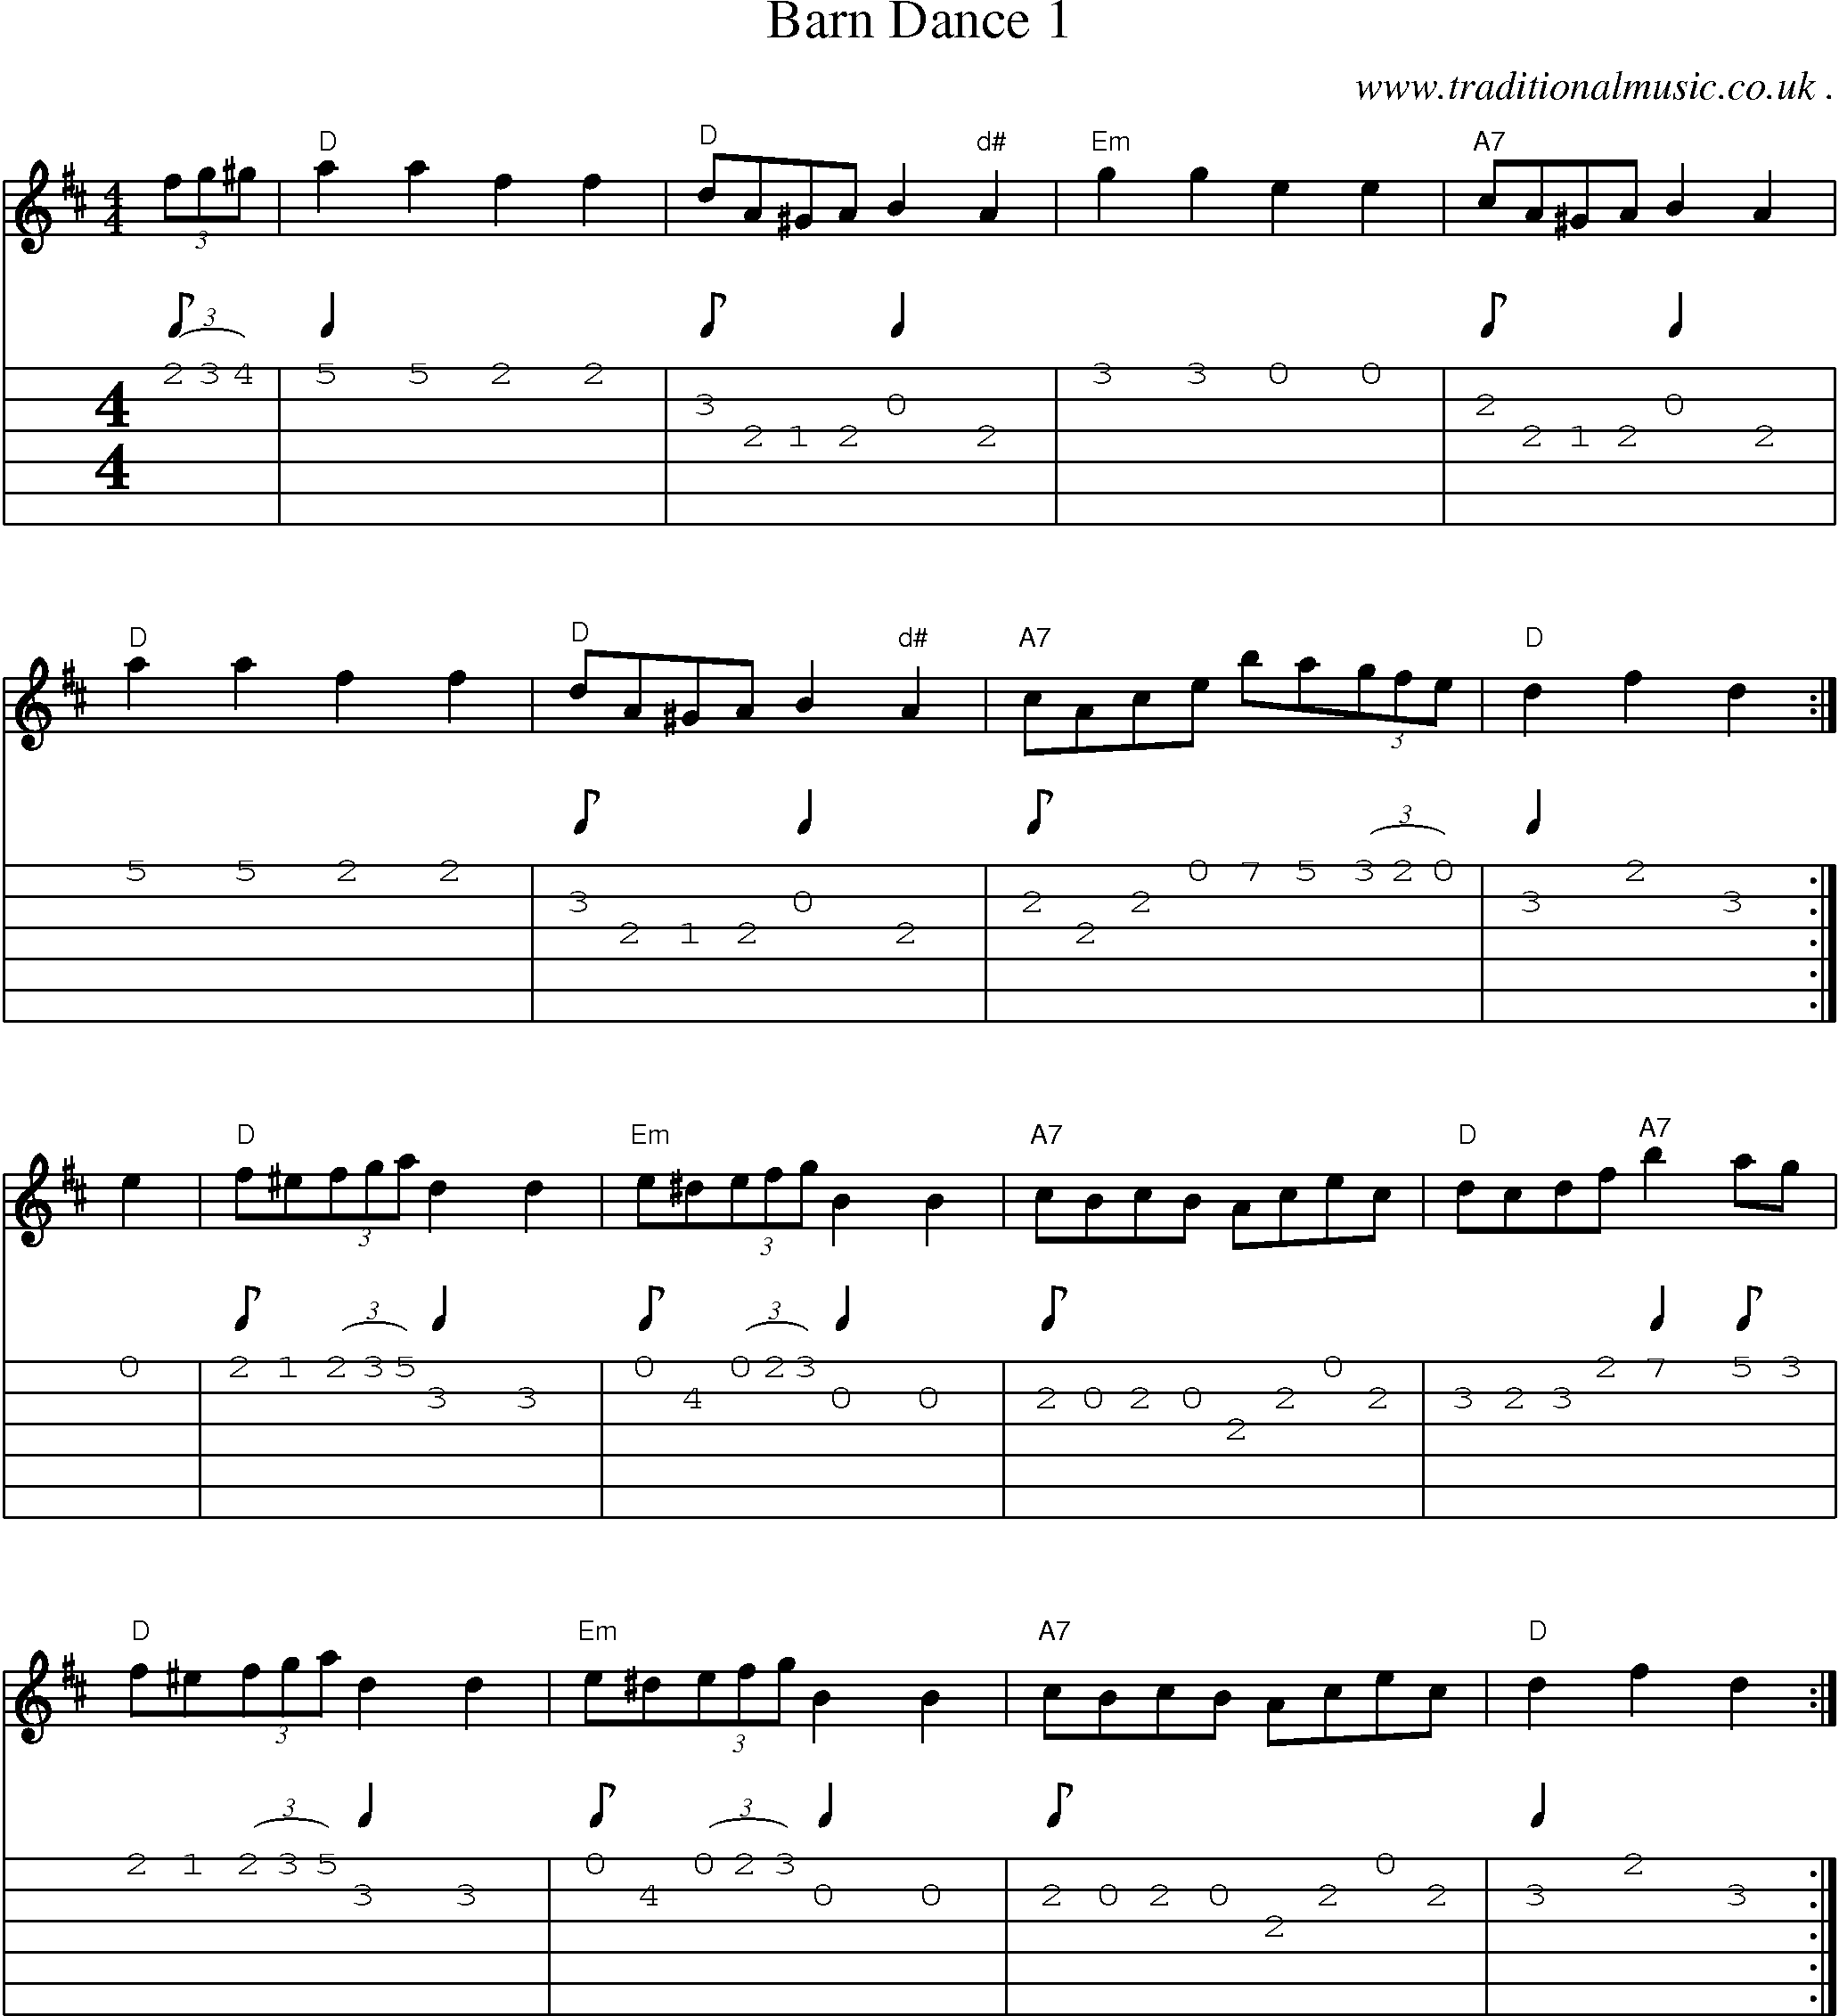 Sheet-Music and Guitar Tabs for Barn Dance 1